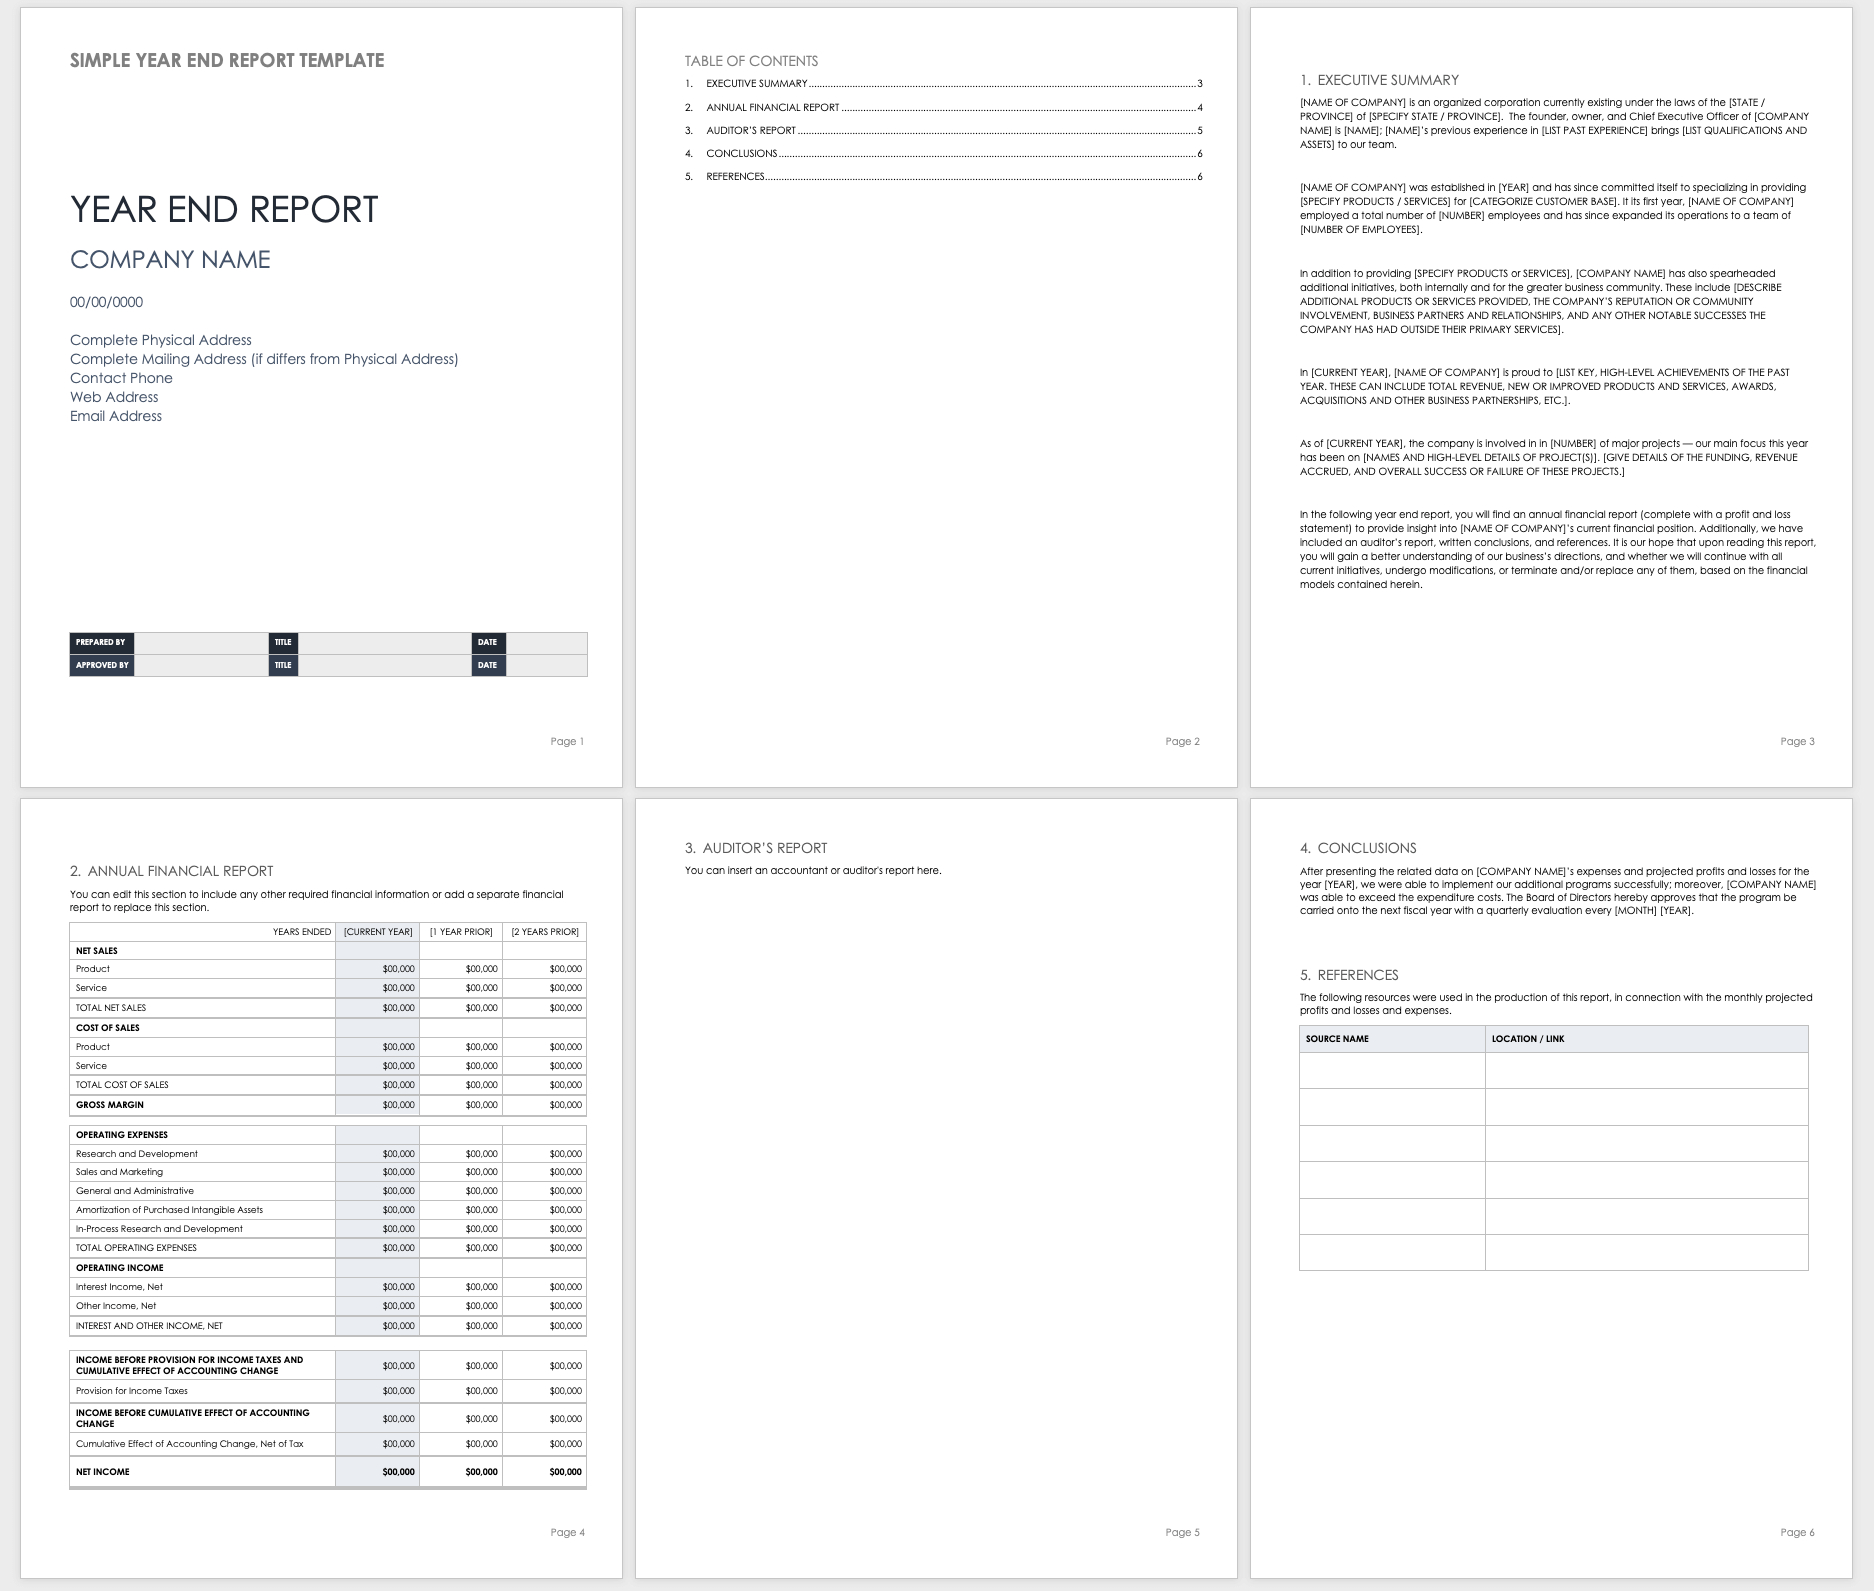 Free Year End Report Templates | Smartsheet With Annual Financial Report Template Word